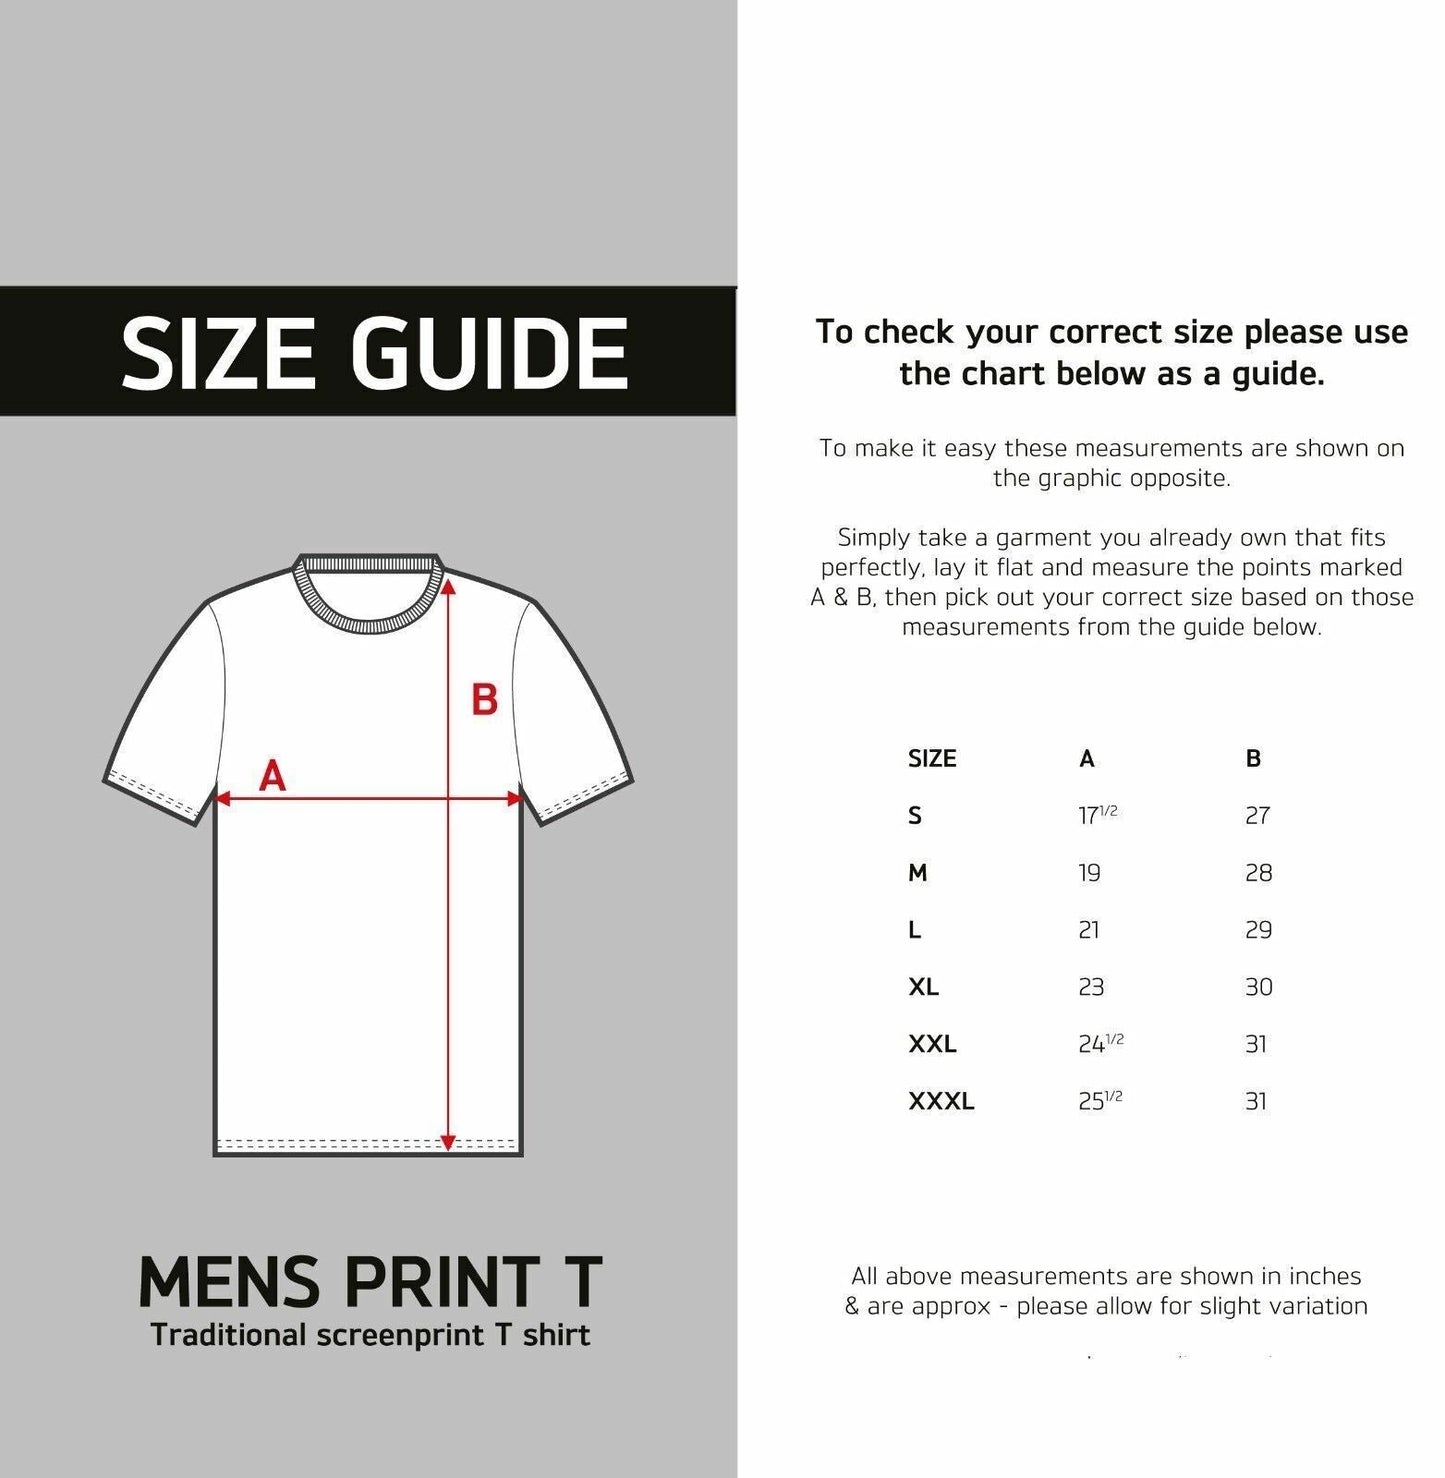 Official Isle Of Man TT Races Custom Grey Action Shot T Shirt - 19Acts3